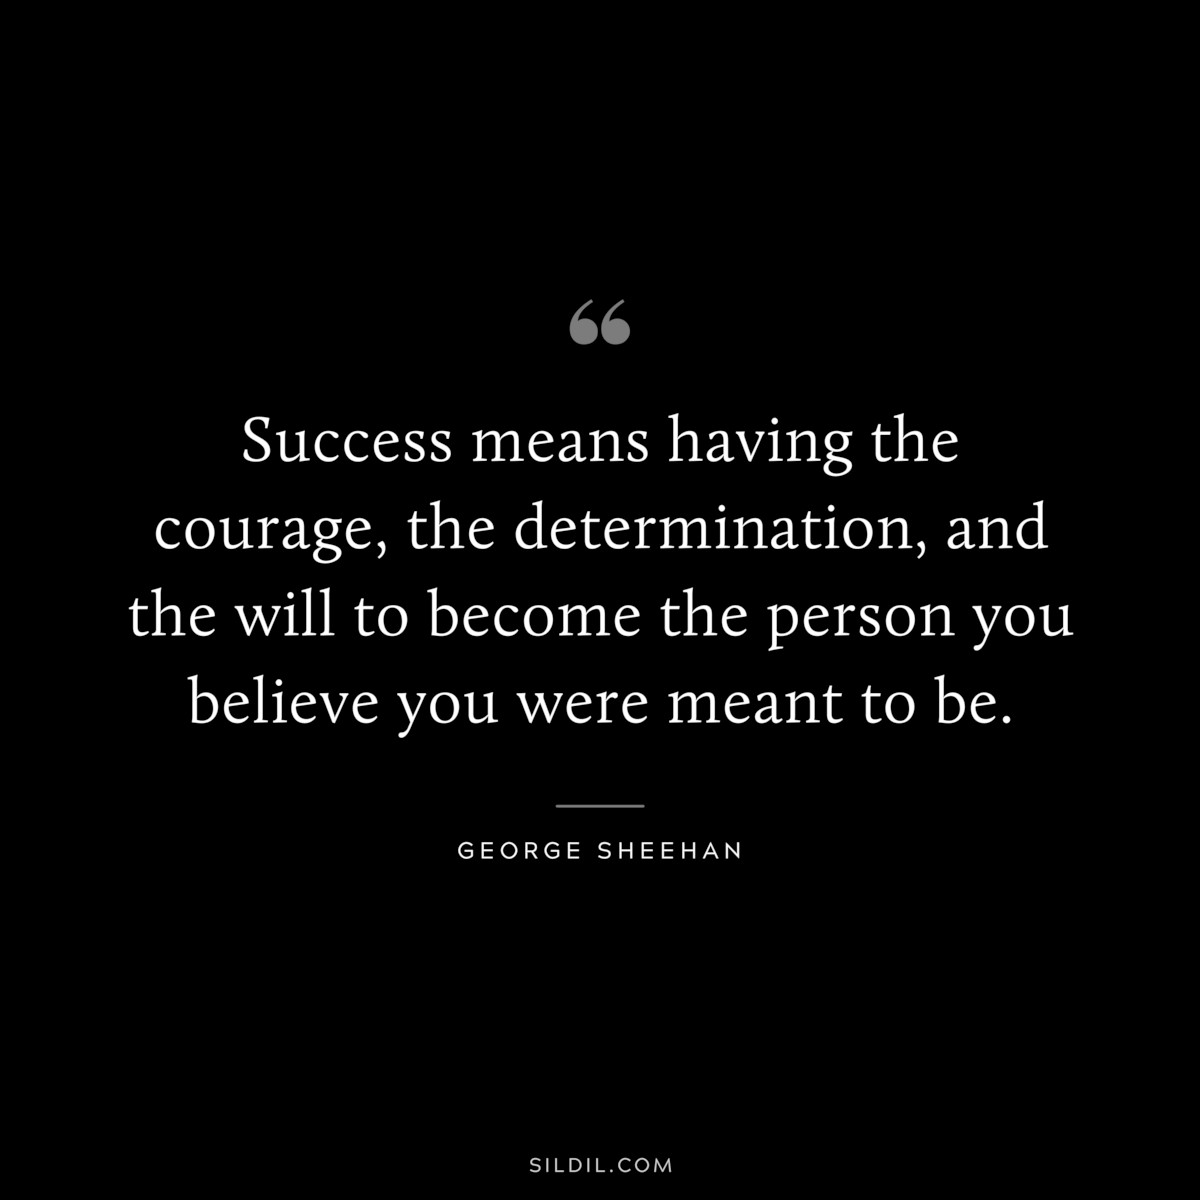 Success means having the courage, the determination, and the will to become the person you believe you were meant to be. ― George Sheehan